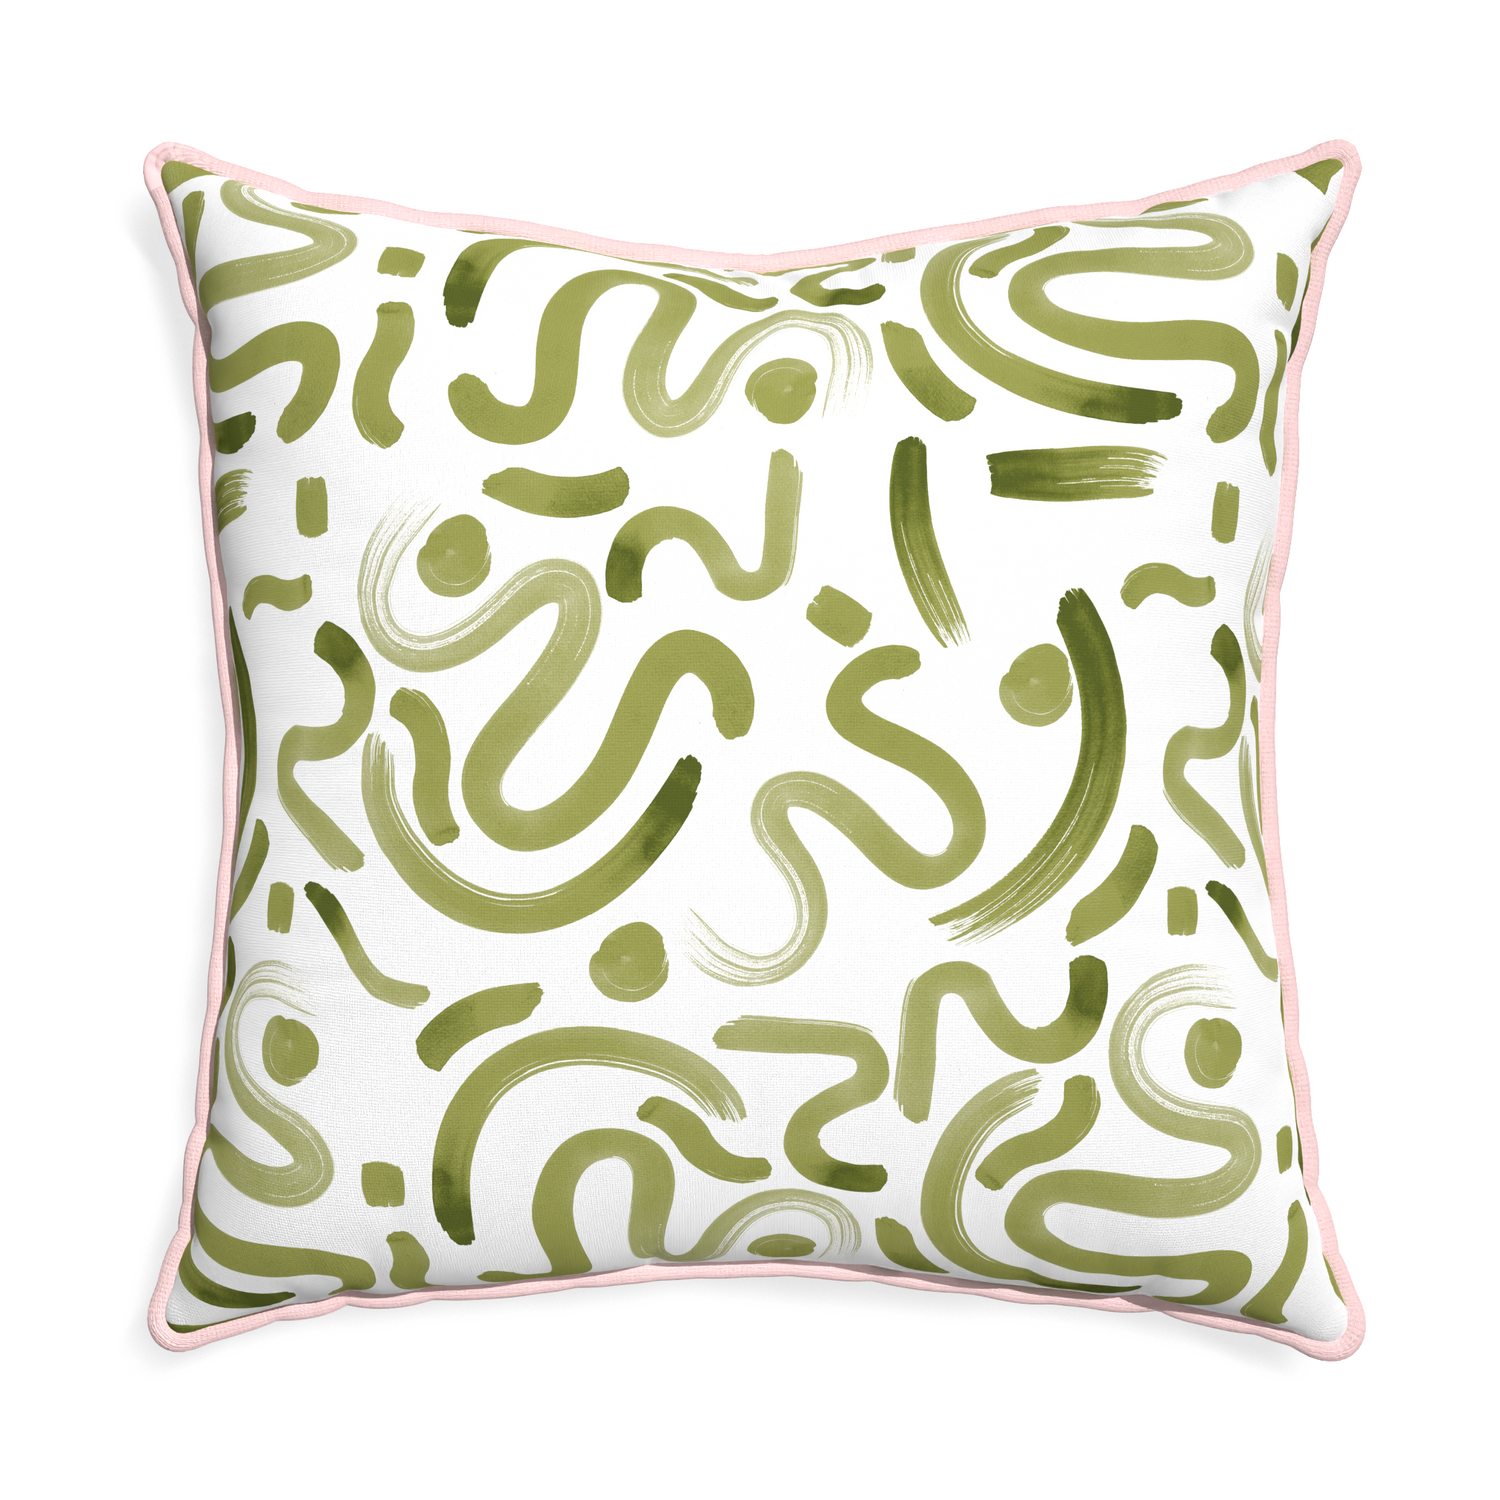 Euro-sham hockney moss custom moss greenpillow with petal piping on white background